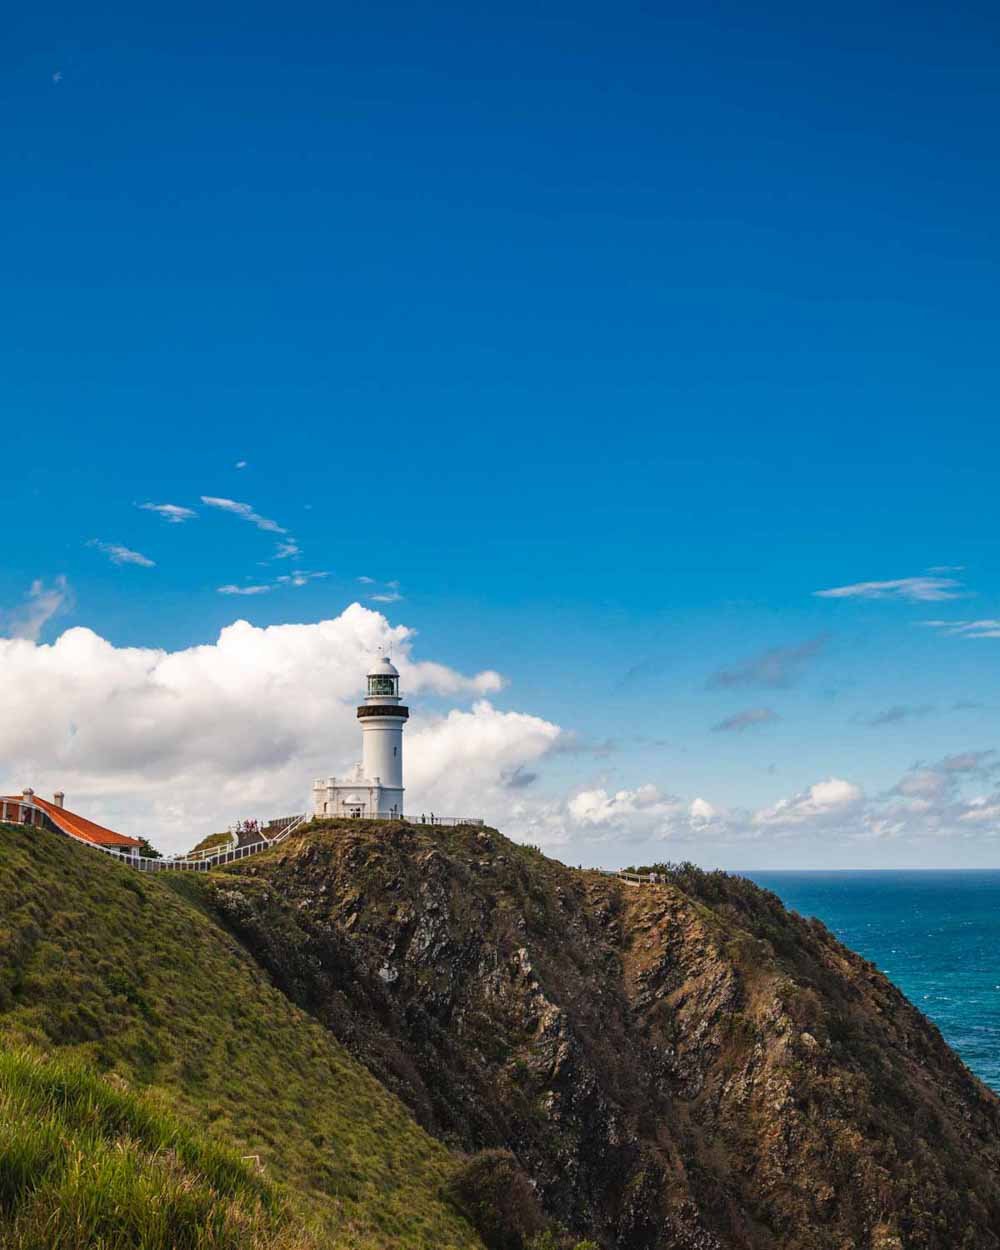 25 things to do in Byron Bay including secret spots no one else